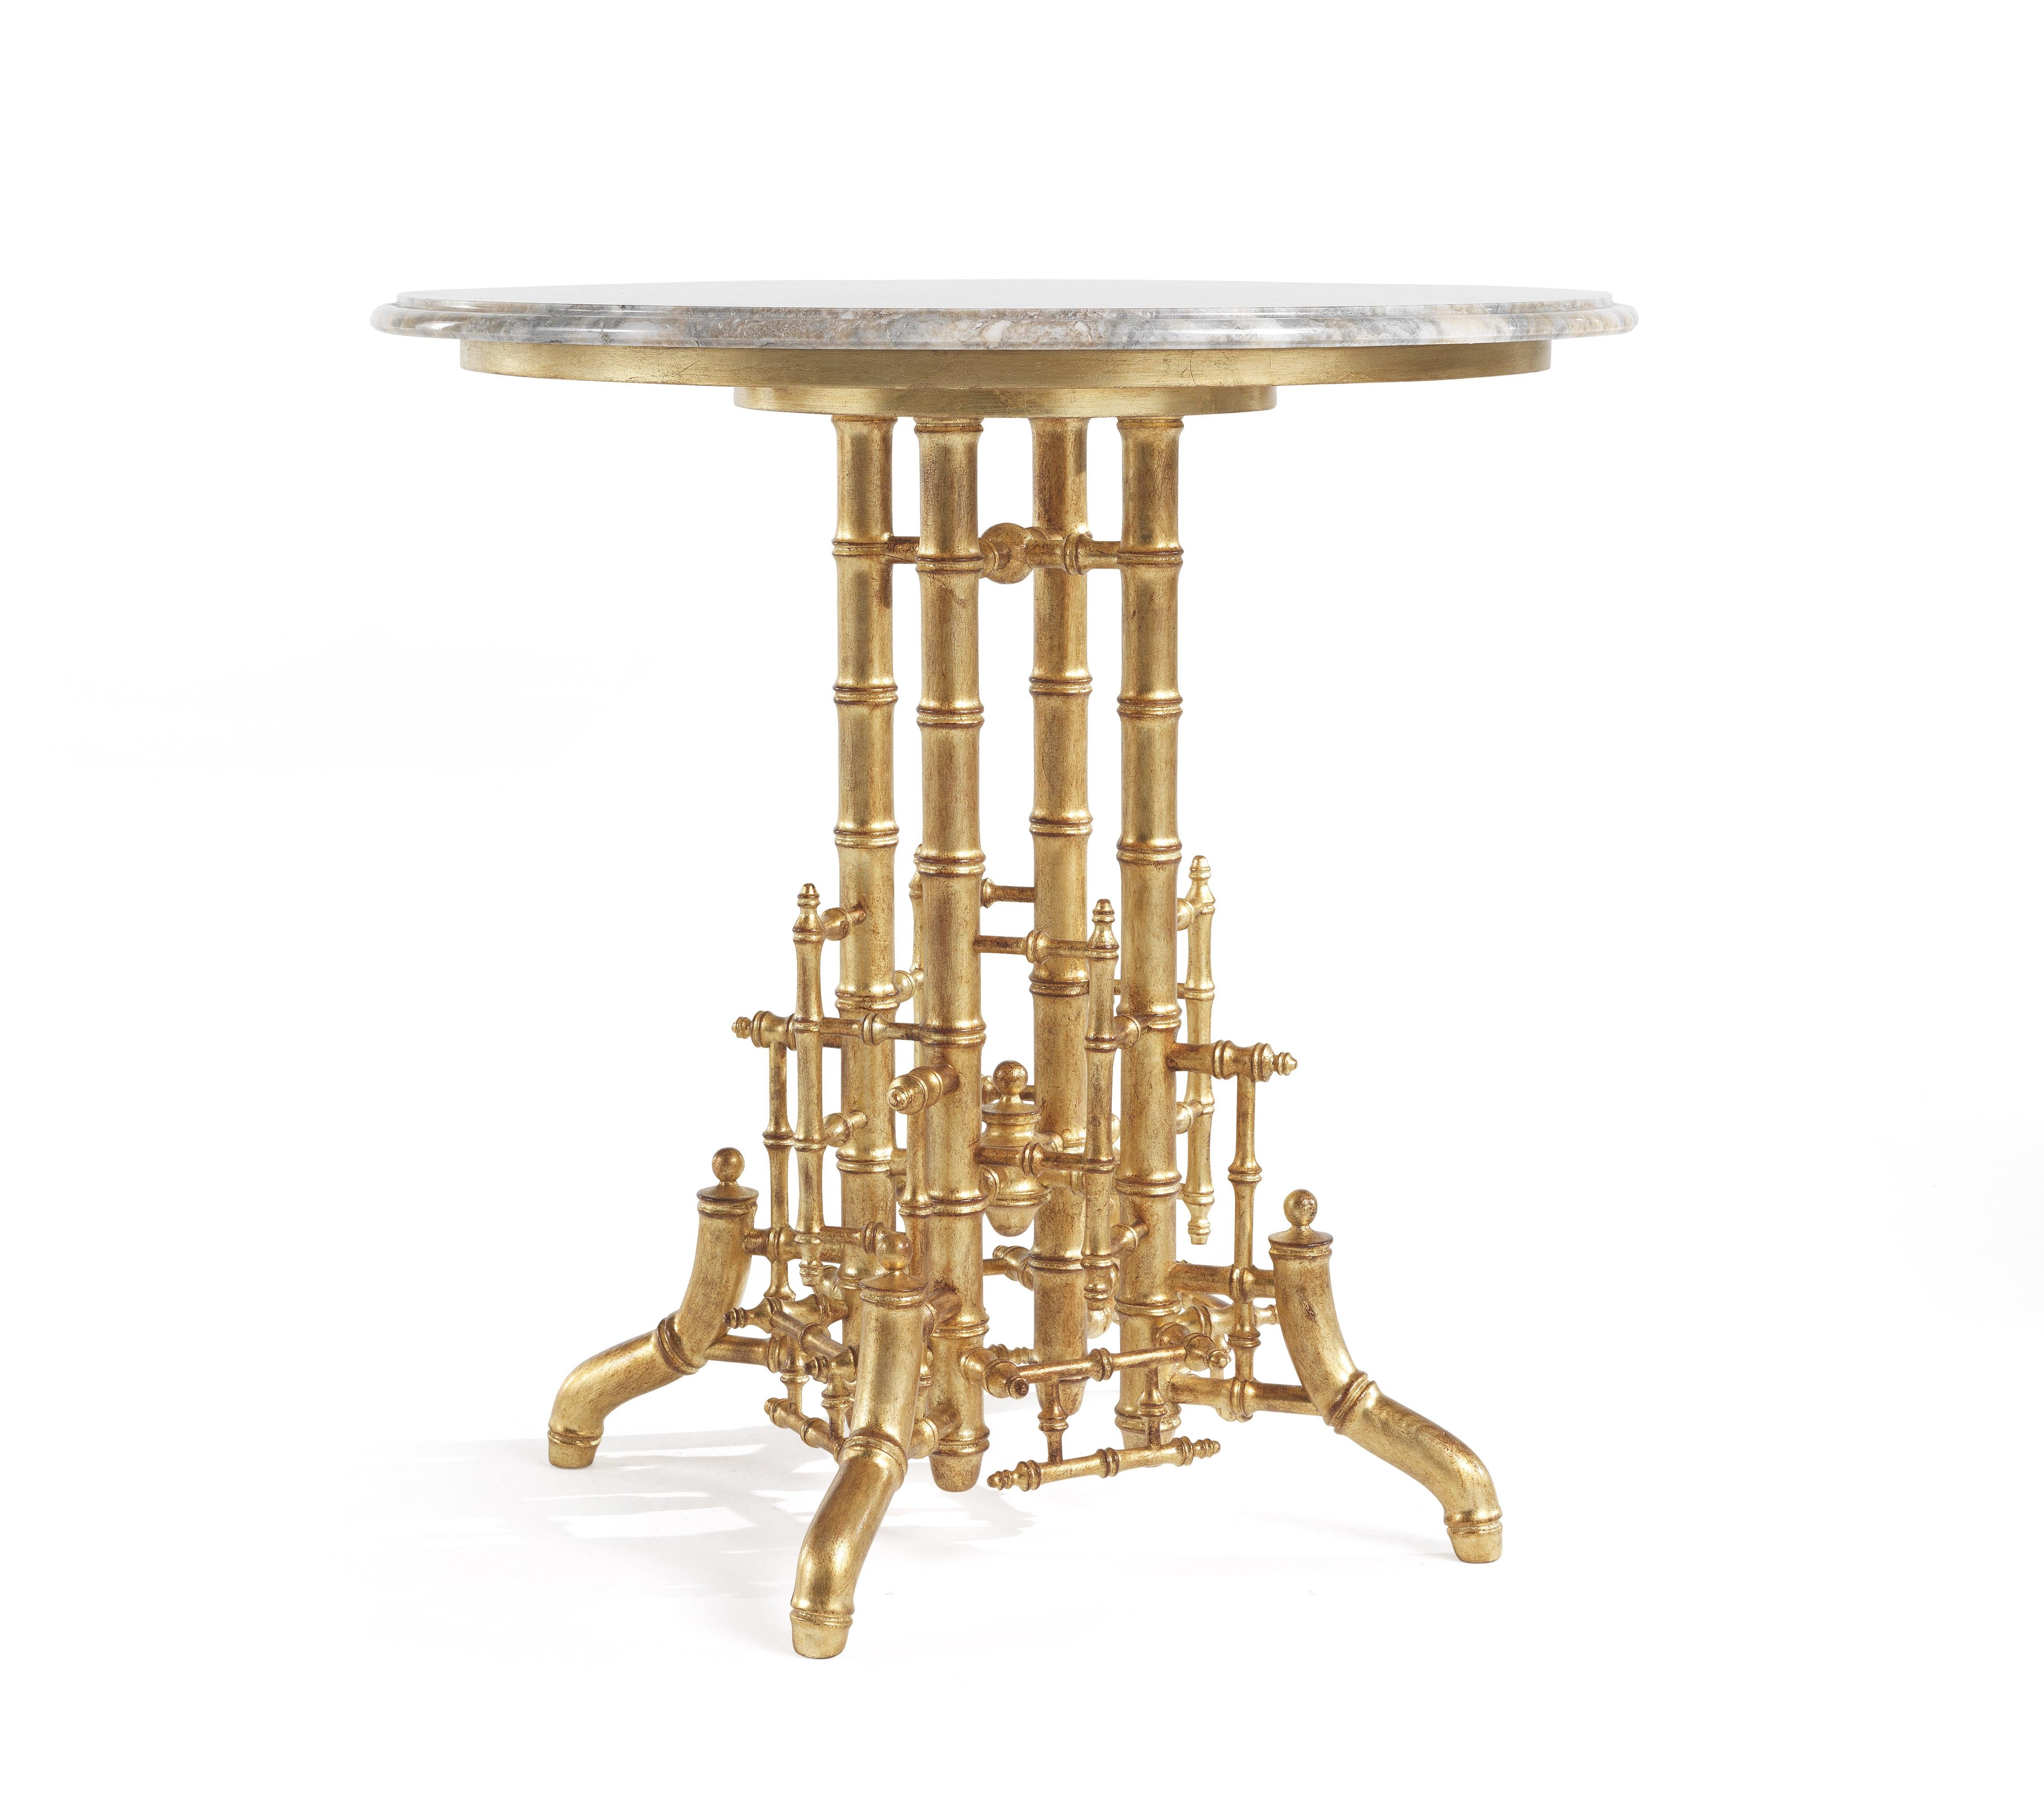 A precious base characterized by elaborate workmanship, with a golden finish and oriental-inspired decorative tips that recall bamboo, is the main feature of the Hiroko line. An elegant and refined collection: the perfect complement for an